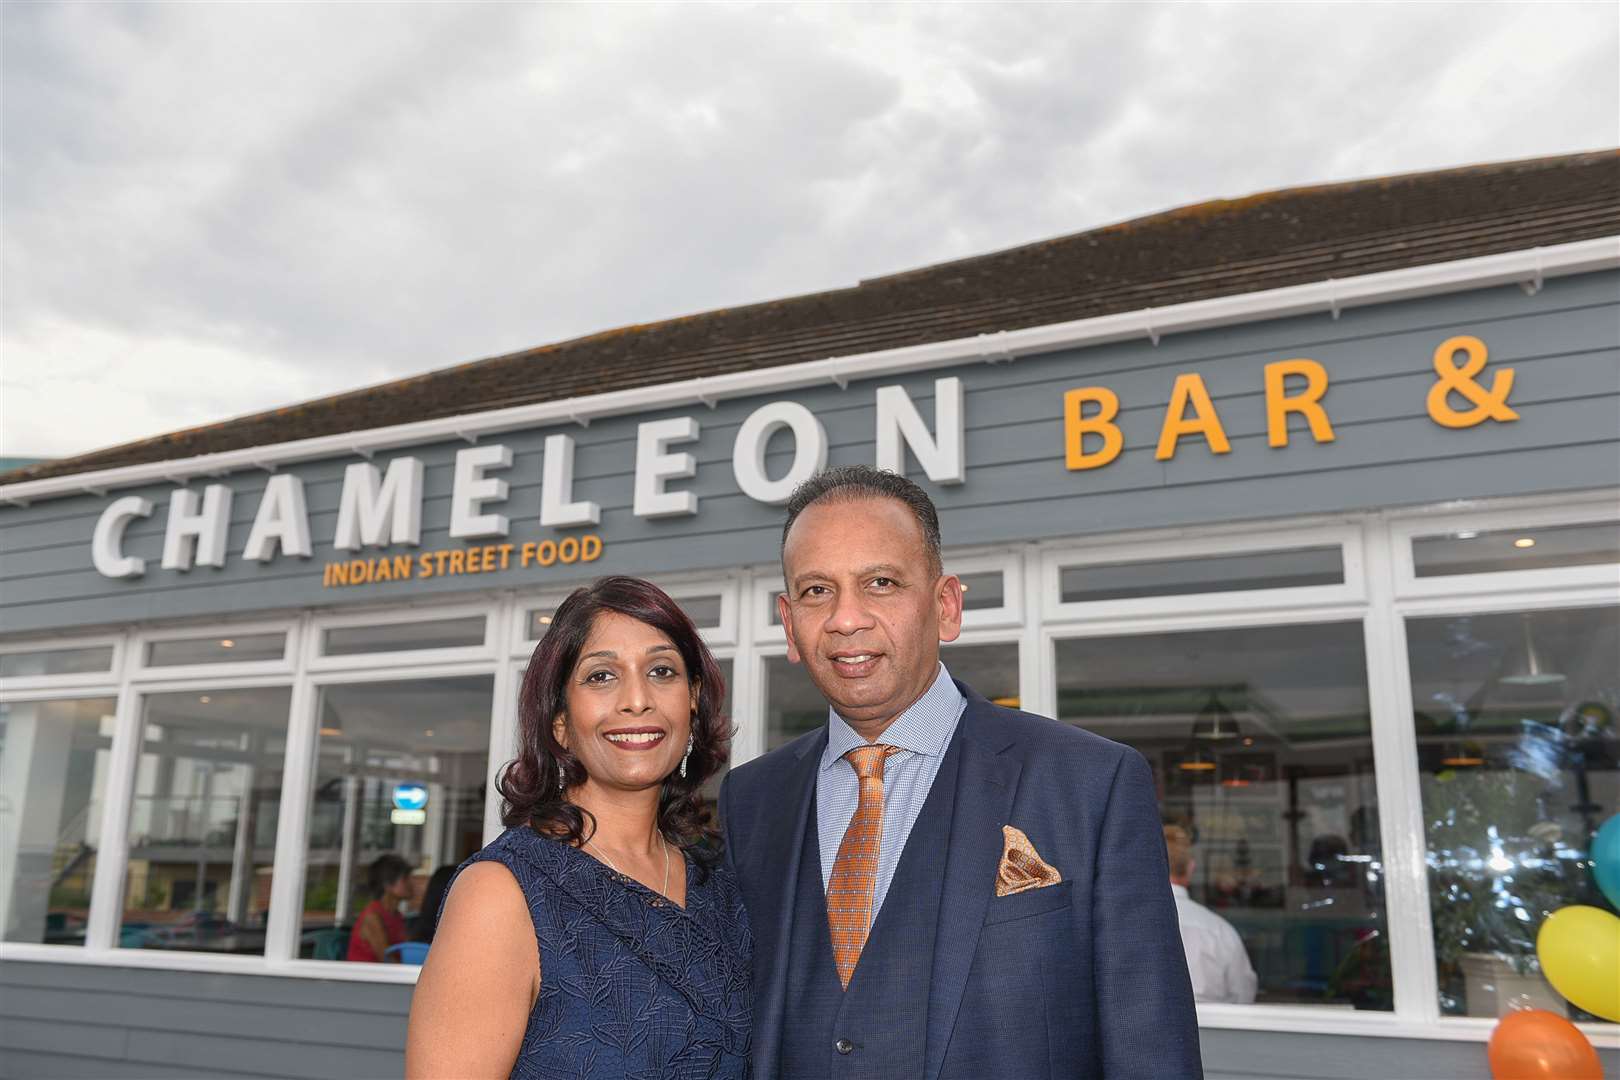 Owners Mr and Mrs Rajamenon at the Chameleon Bar & Grill in Hythe